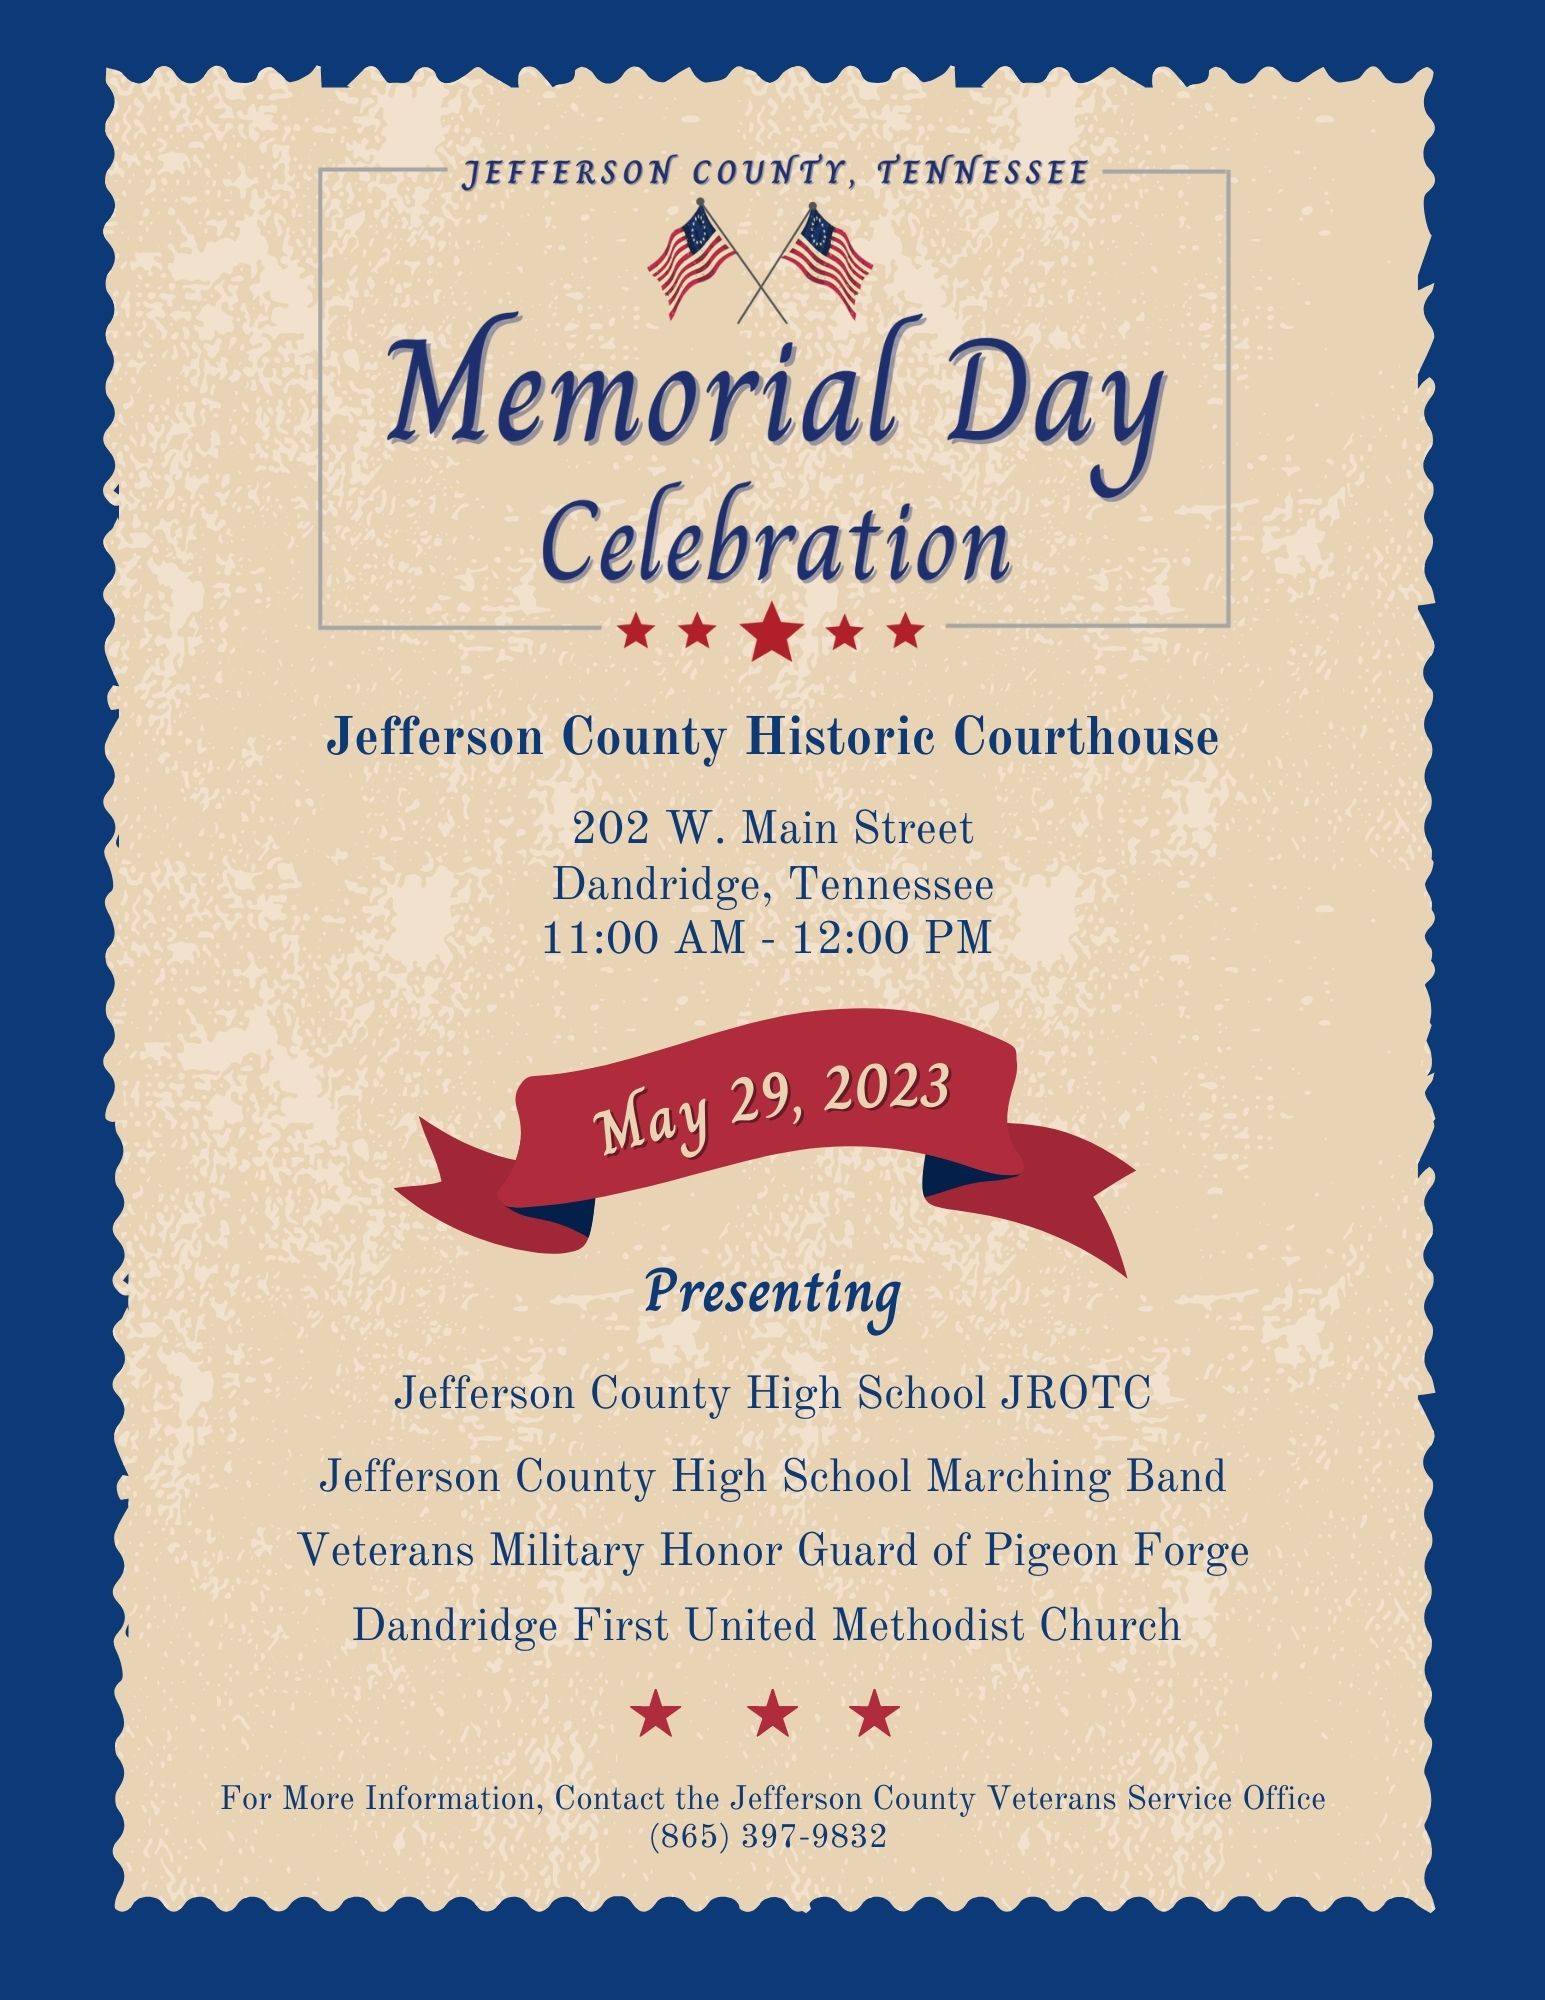 jefferson county tennessee memorial day celebration event poster